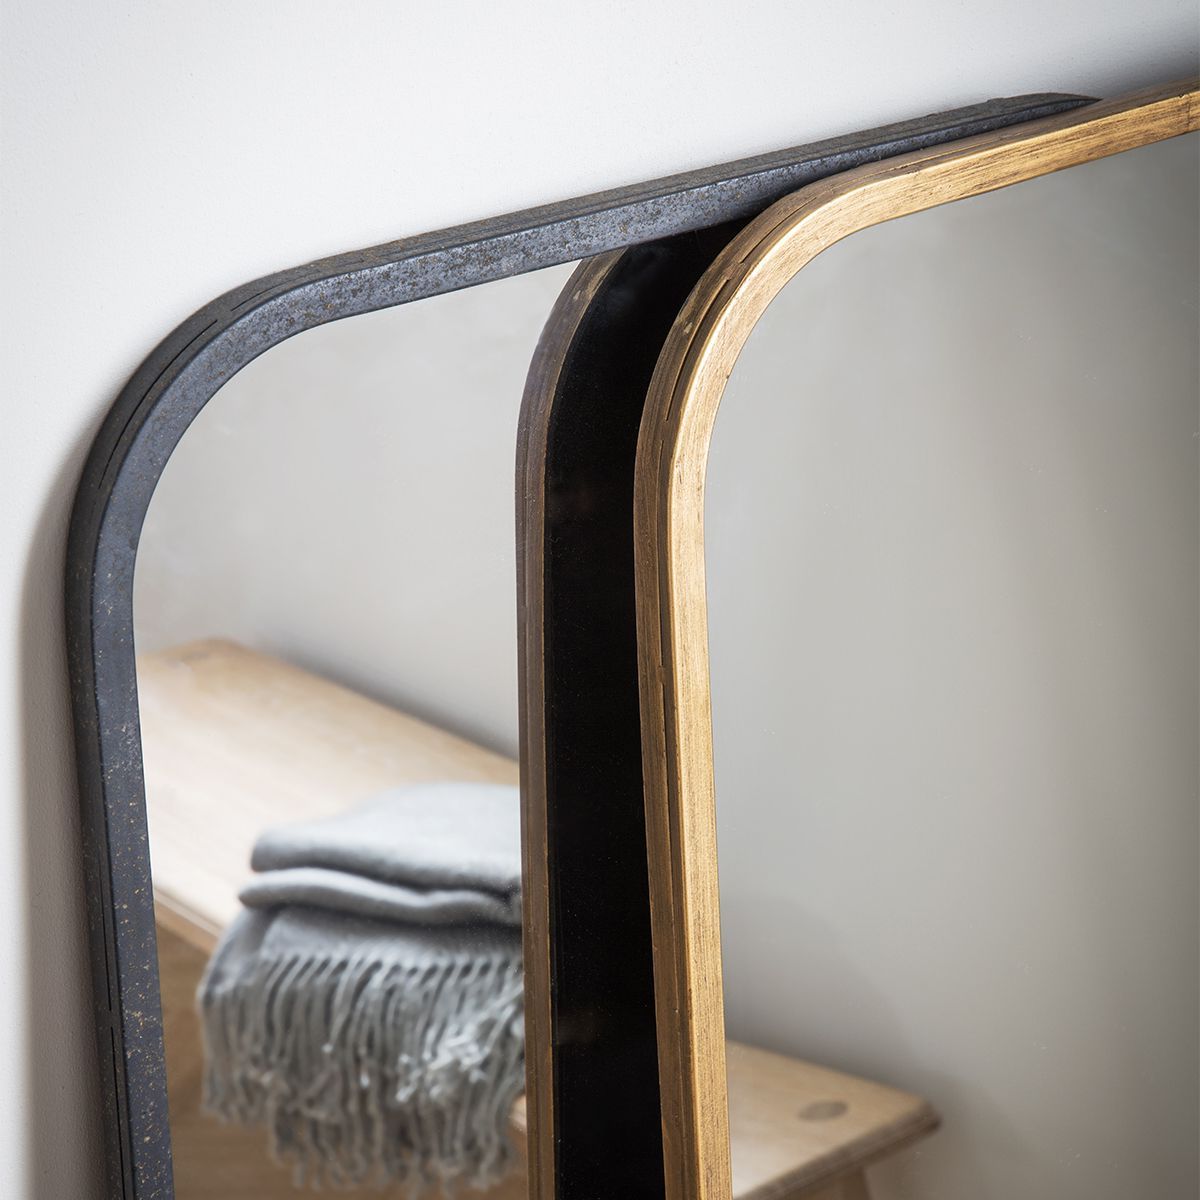 Trendy Gold Rounded Edge Mirrors Regarding This Curved Edge Rectangle Gold Mirror Is Simple Yet Super Stylish (View 13 of 15)